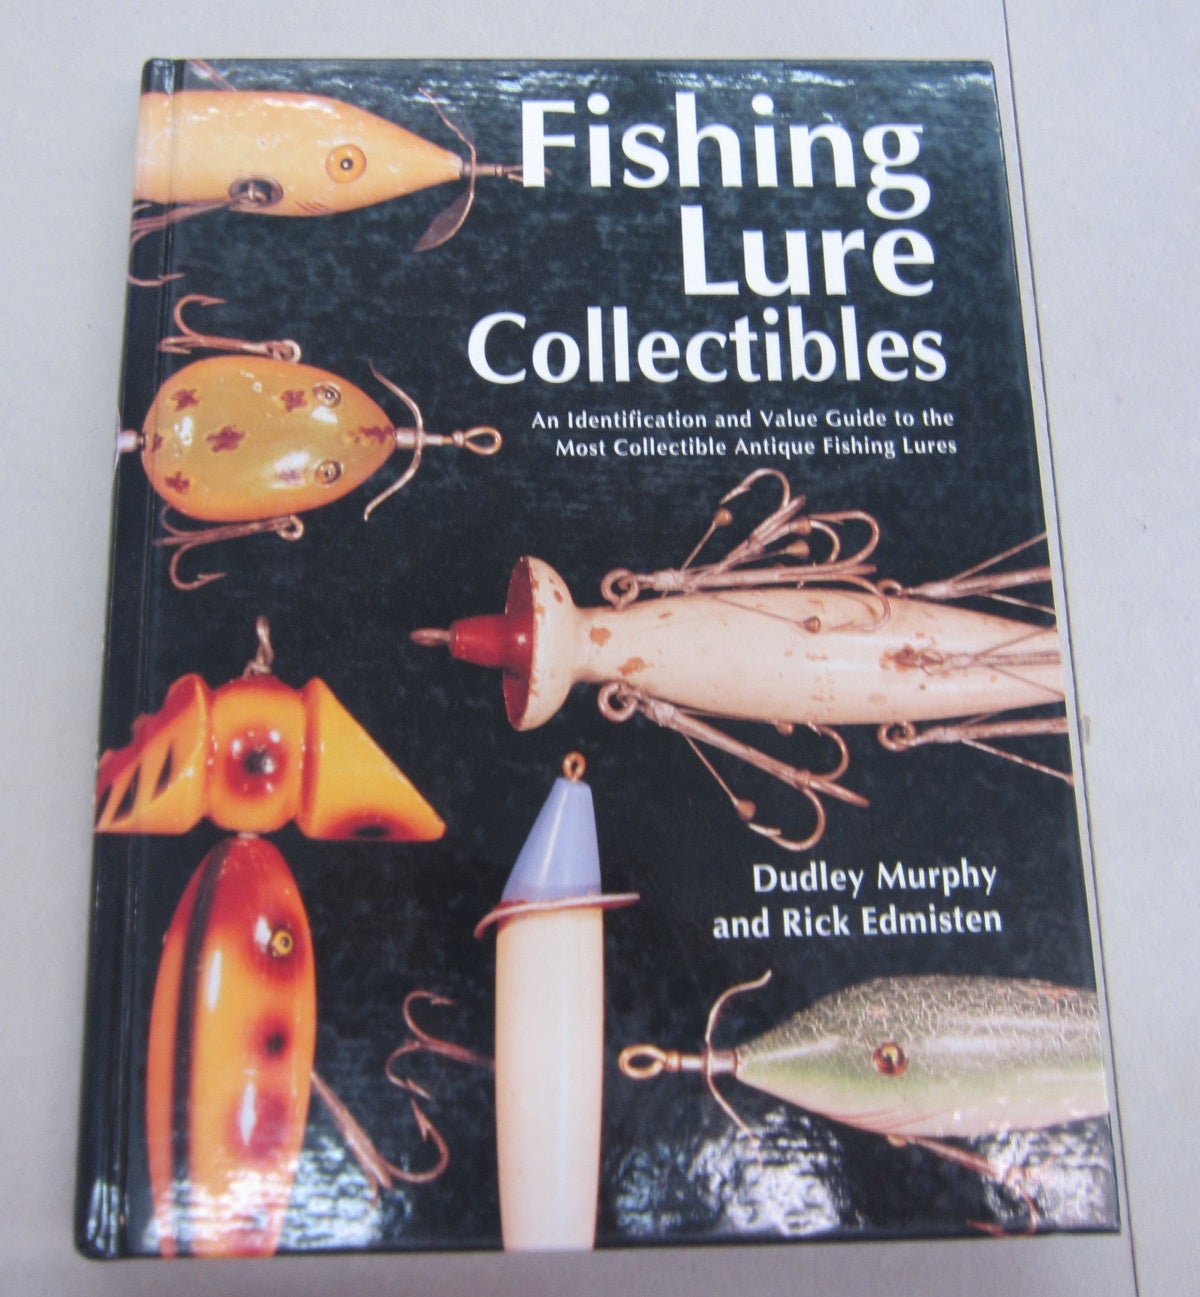 Fishing Lure Collectibles: An Identification and Value Guide to the Most  Collectible Antique Fishing Lure by Dudley Murphy, Rick, Edmisten on Midway